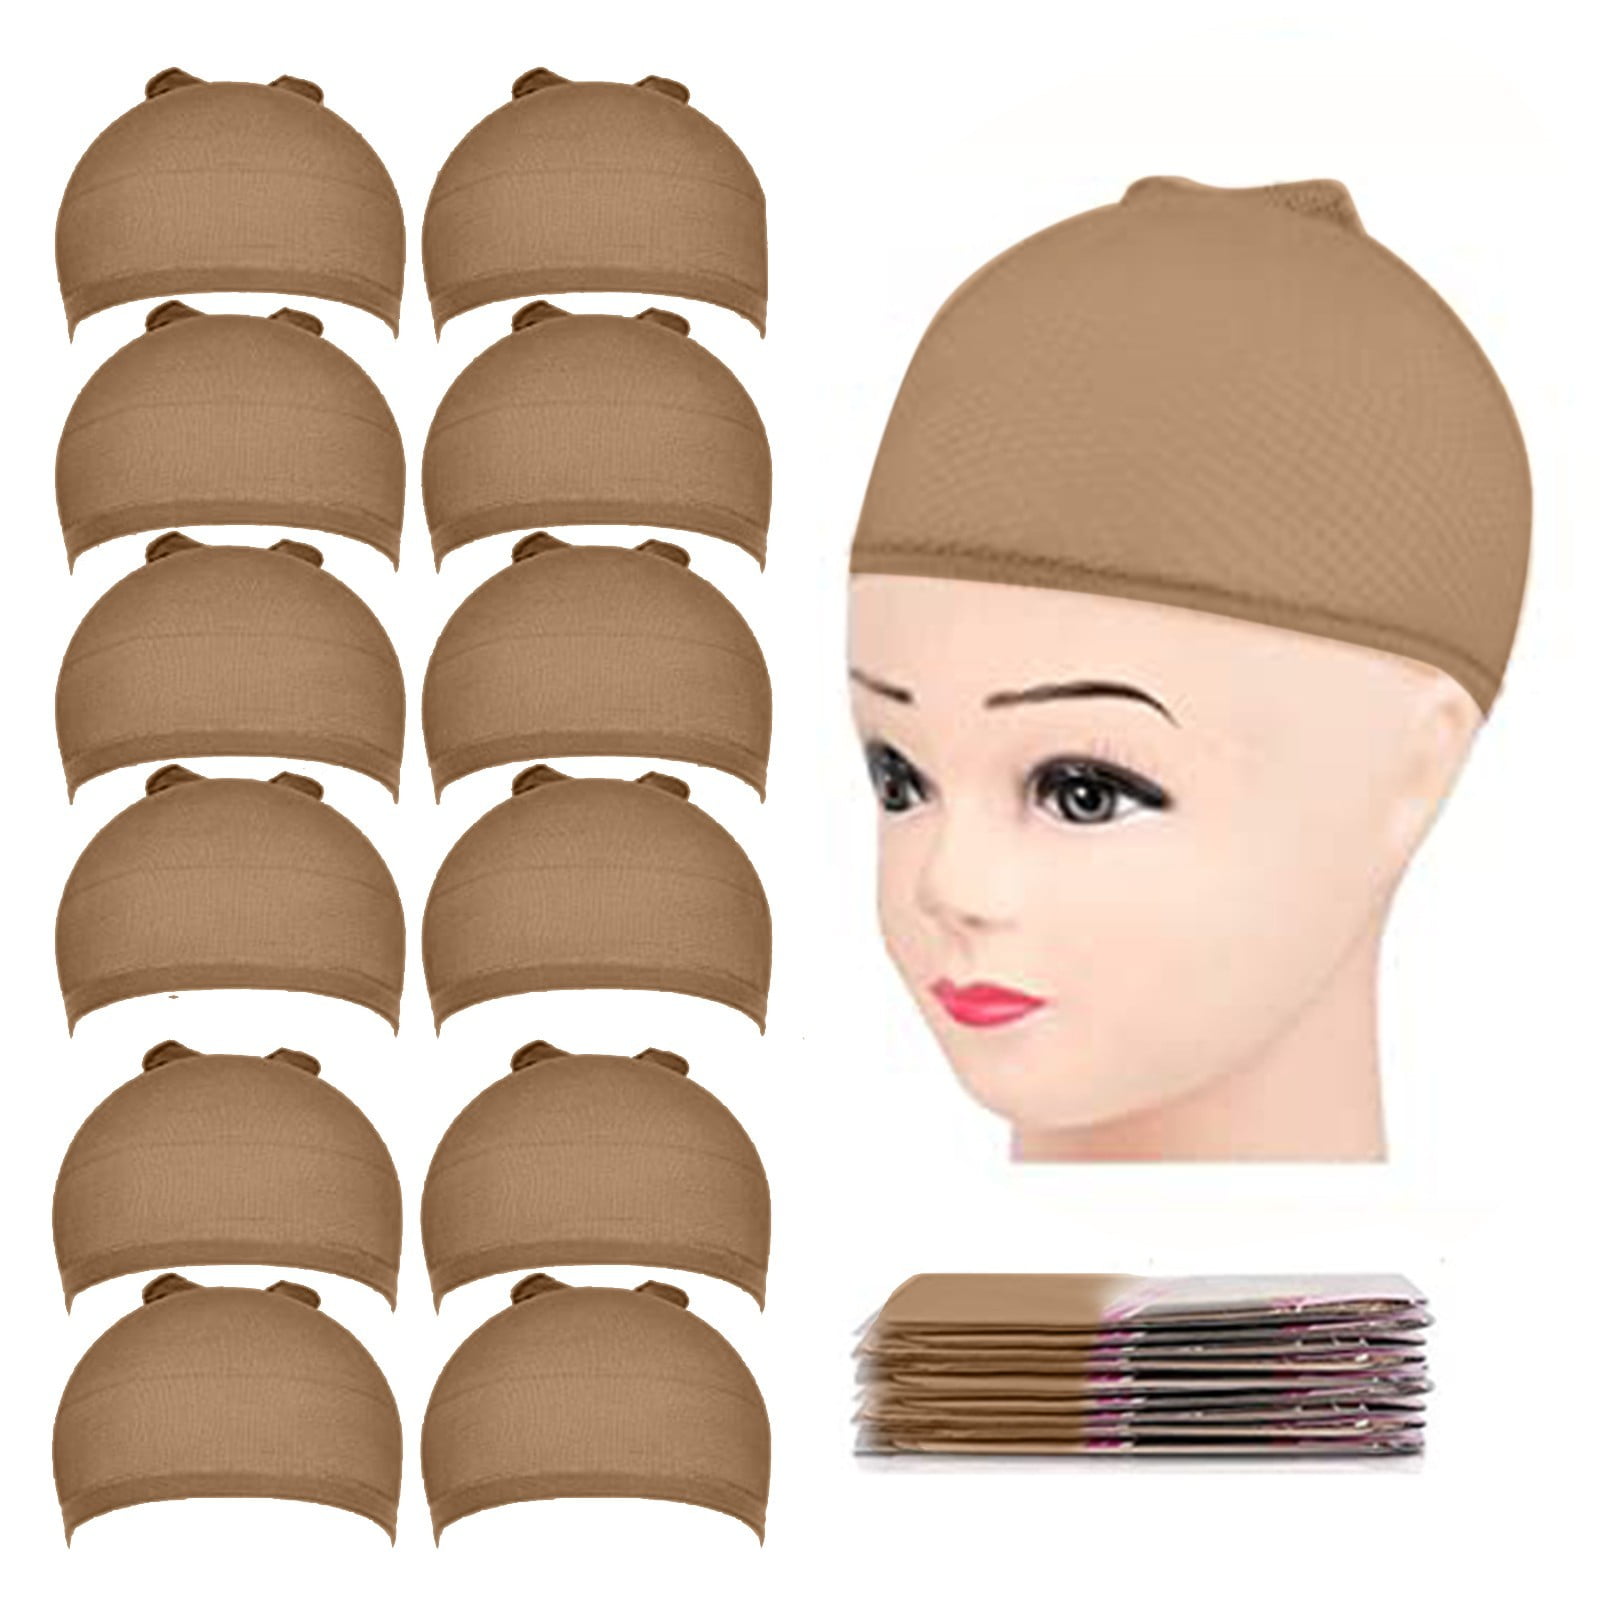 Jsaierl Hair Mesh Wig Cap Hair Net Stocking Wig Caps for Women 12 Pack Light Brown, Size: One size, Purple